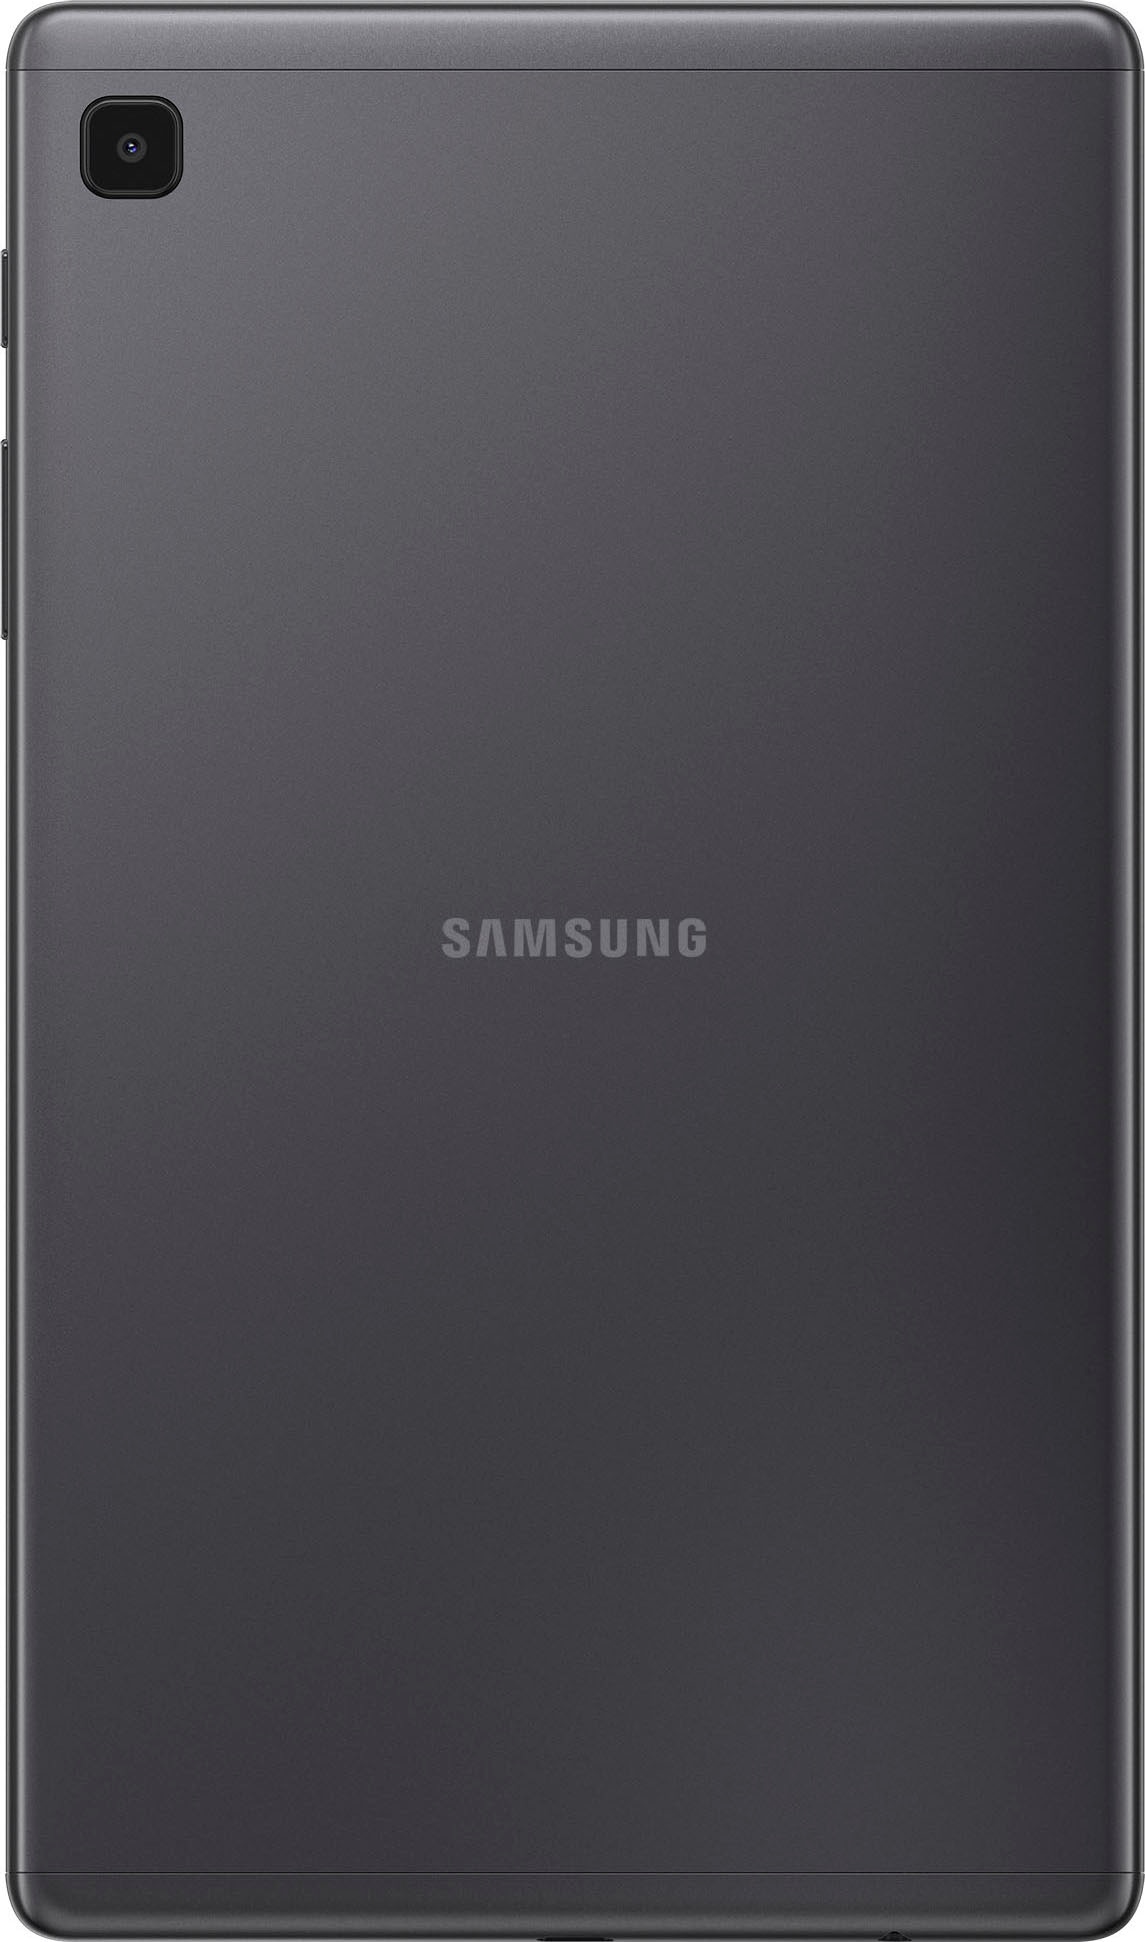 Samsung Tablet »Galaxy Tab A7 Lite LTE«, (Android)